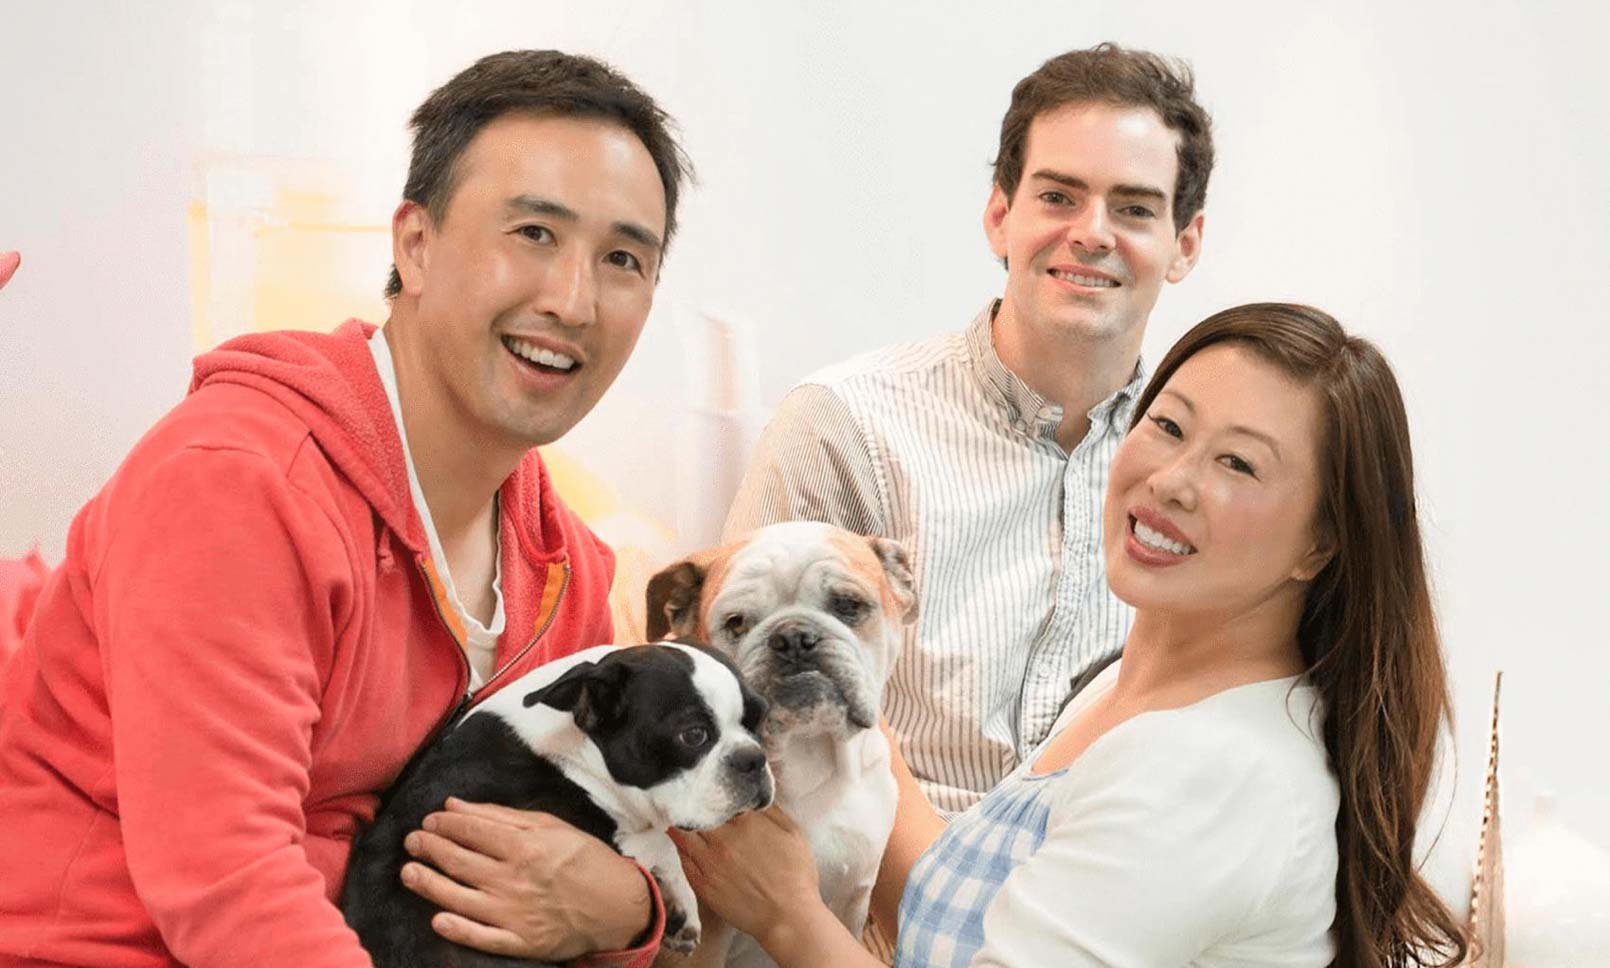 100% Pure's founders, James Wang, Susie Wang, and Ric Kostick pose with two small dogs.